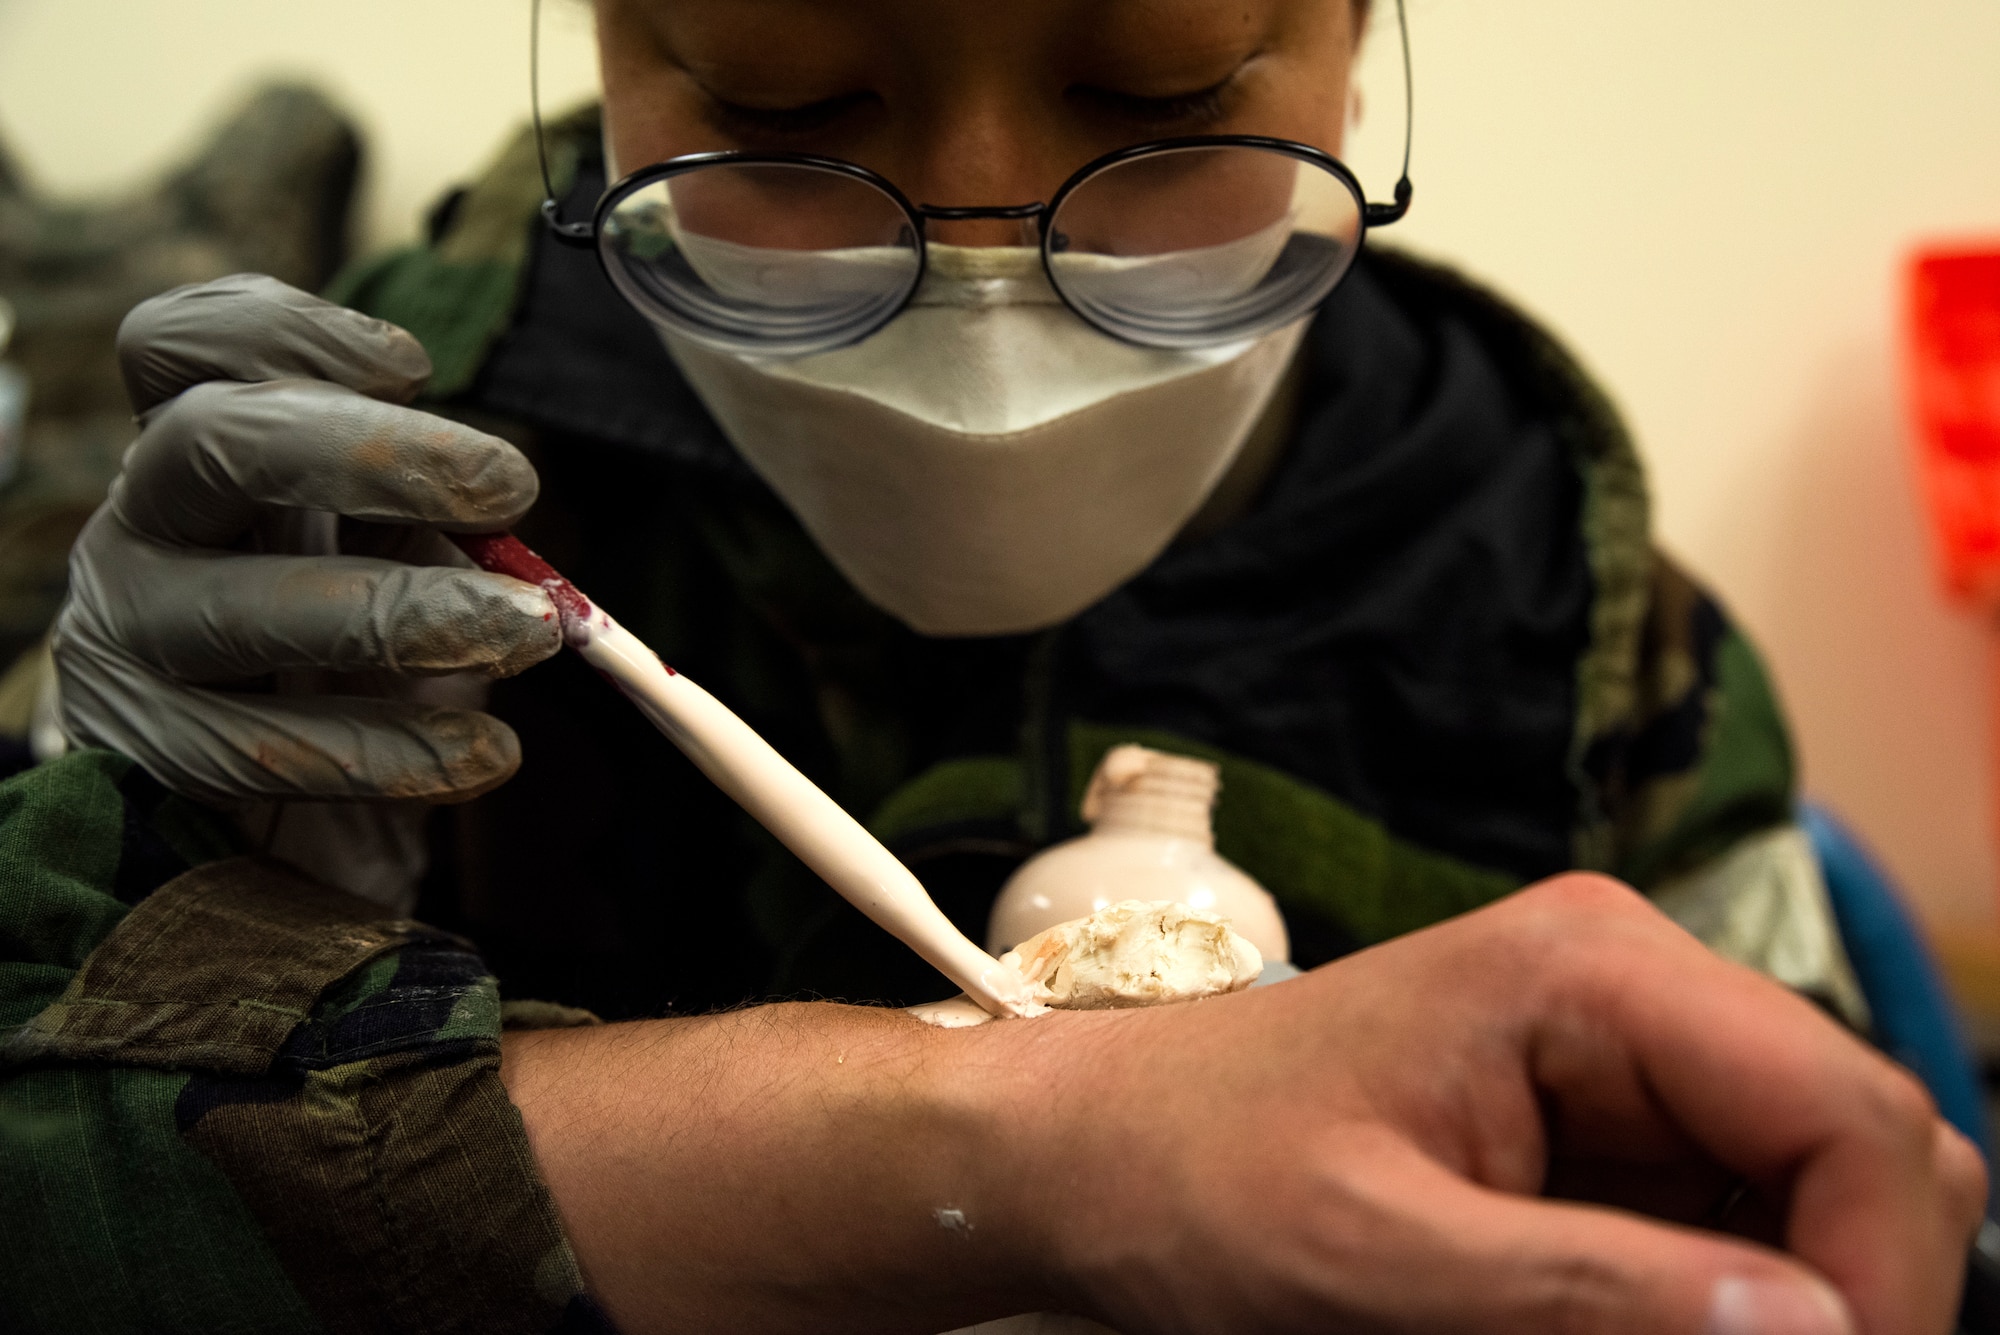 Senior Airman Kenyetta Oglesbe prepares a wrist fracture moulage for a member prior to a training scenario